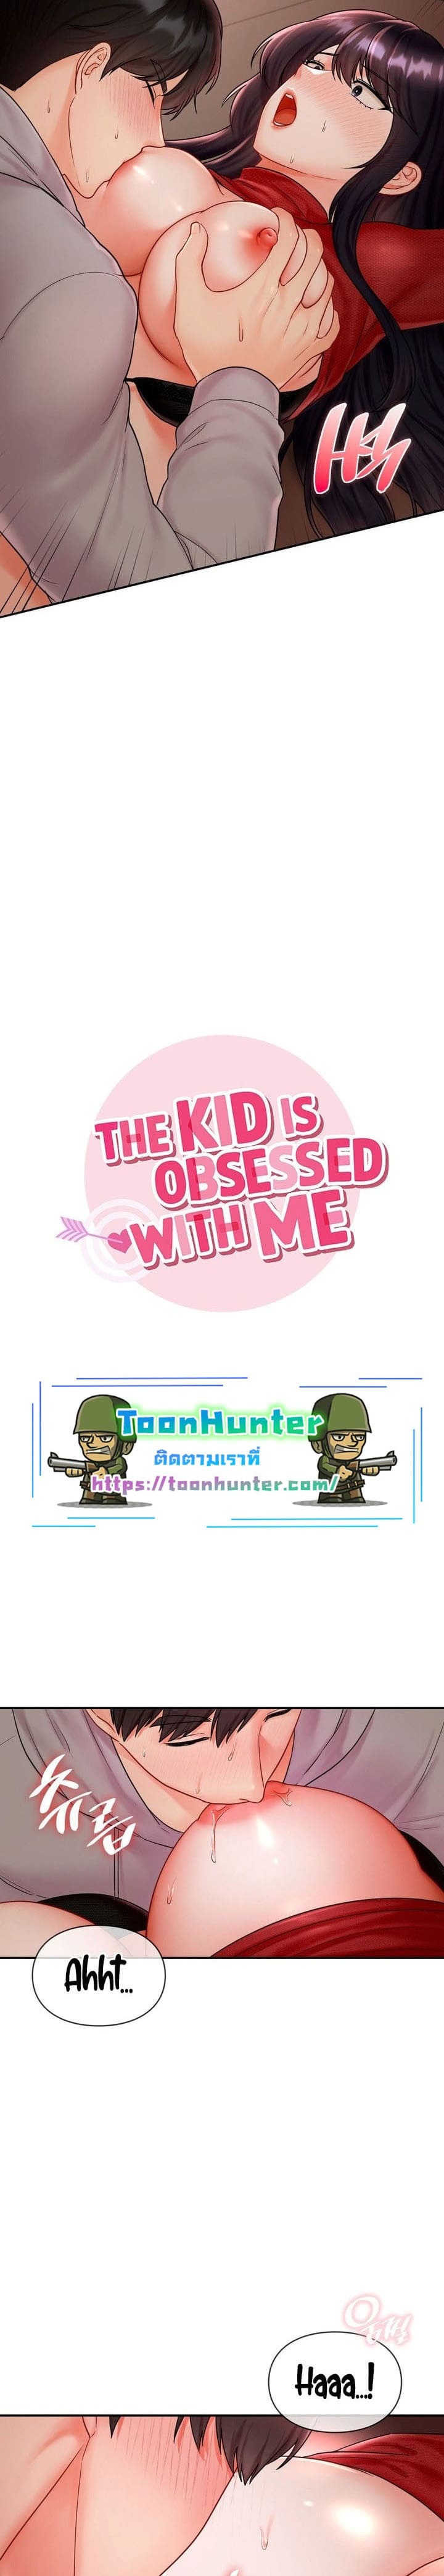 The Kid Is Obsessed With Me ตอนที่ 6 ภาพ 1